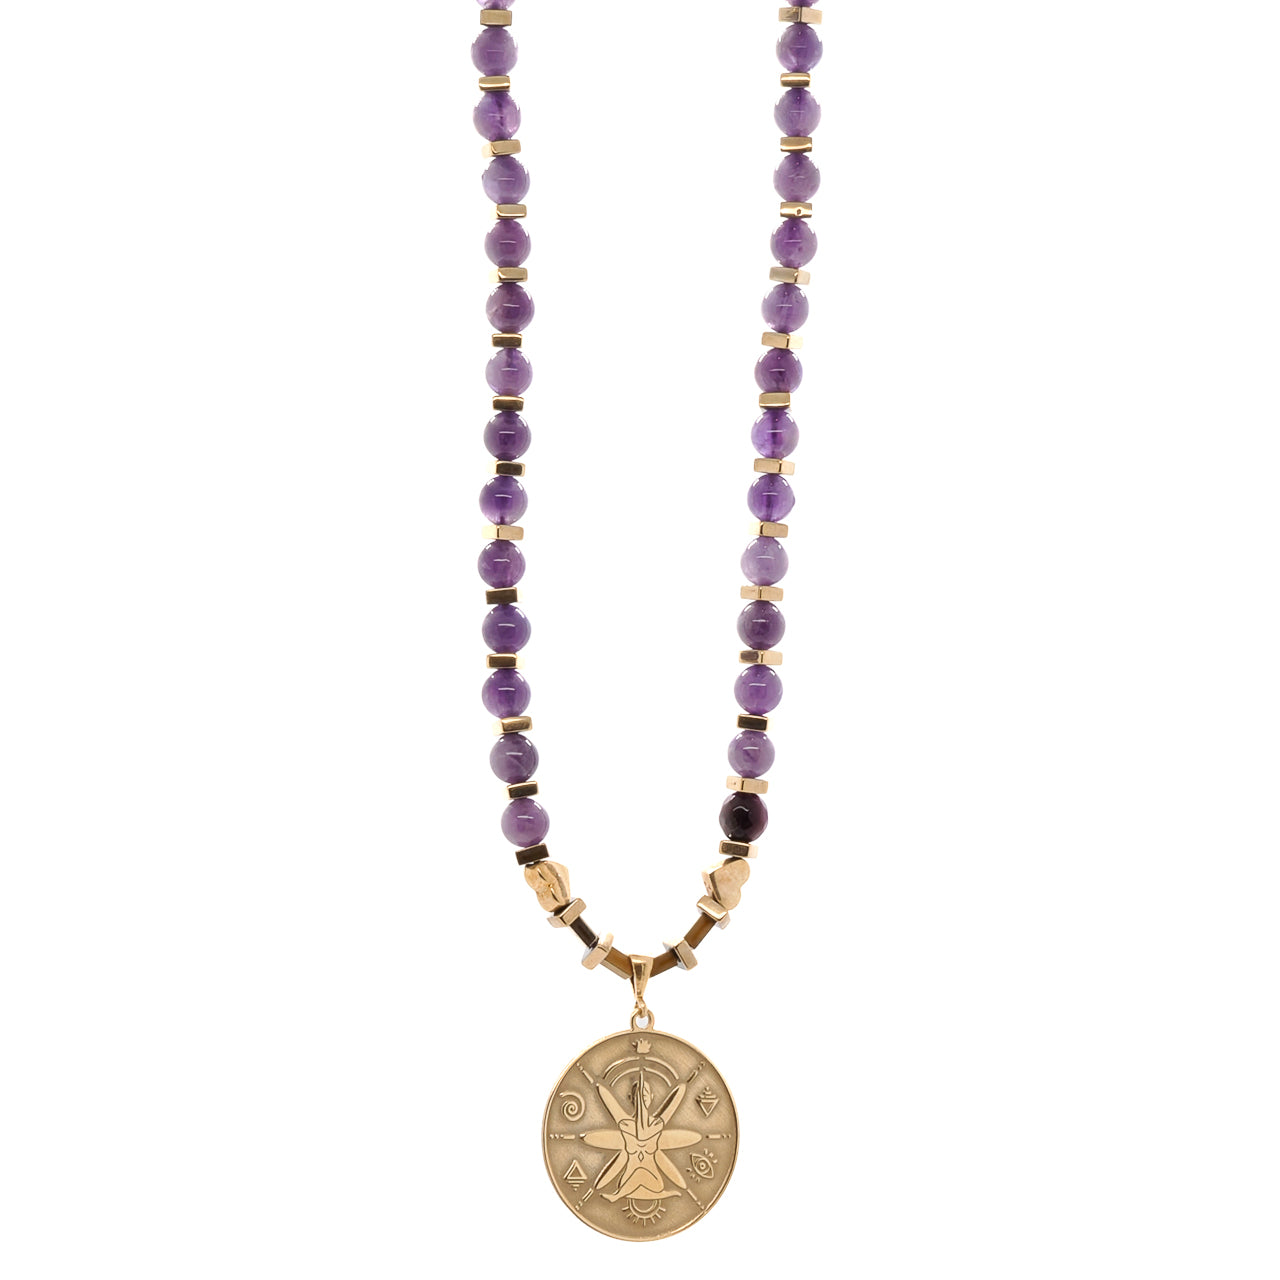 Embrace the Good - the captivating See The Good Amethyst Choker Necklace.